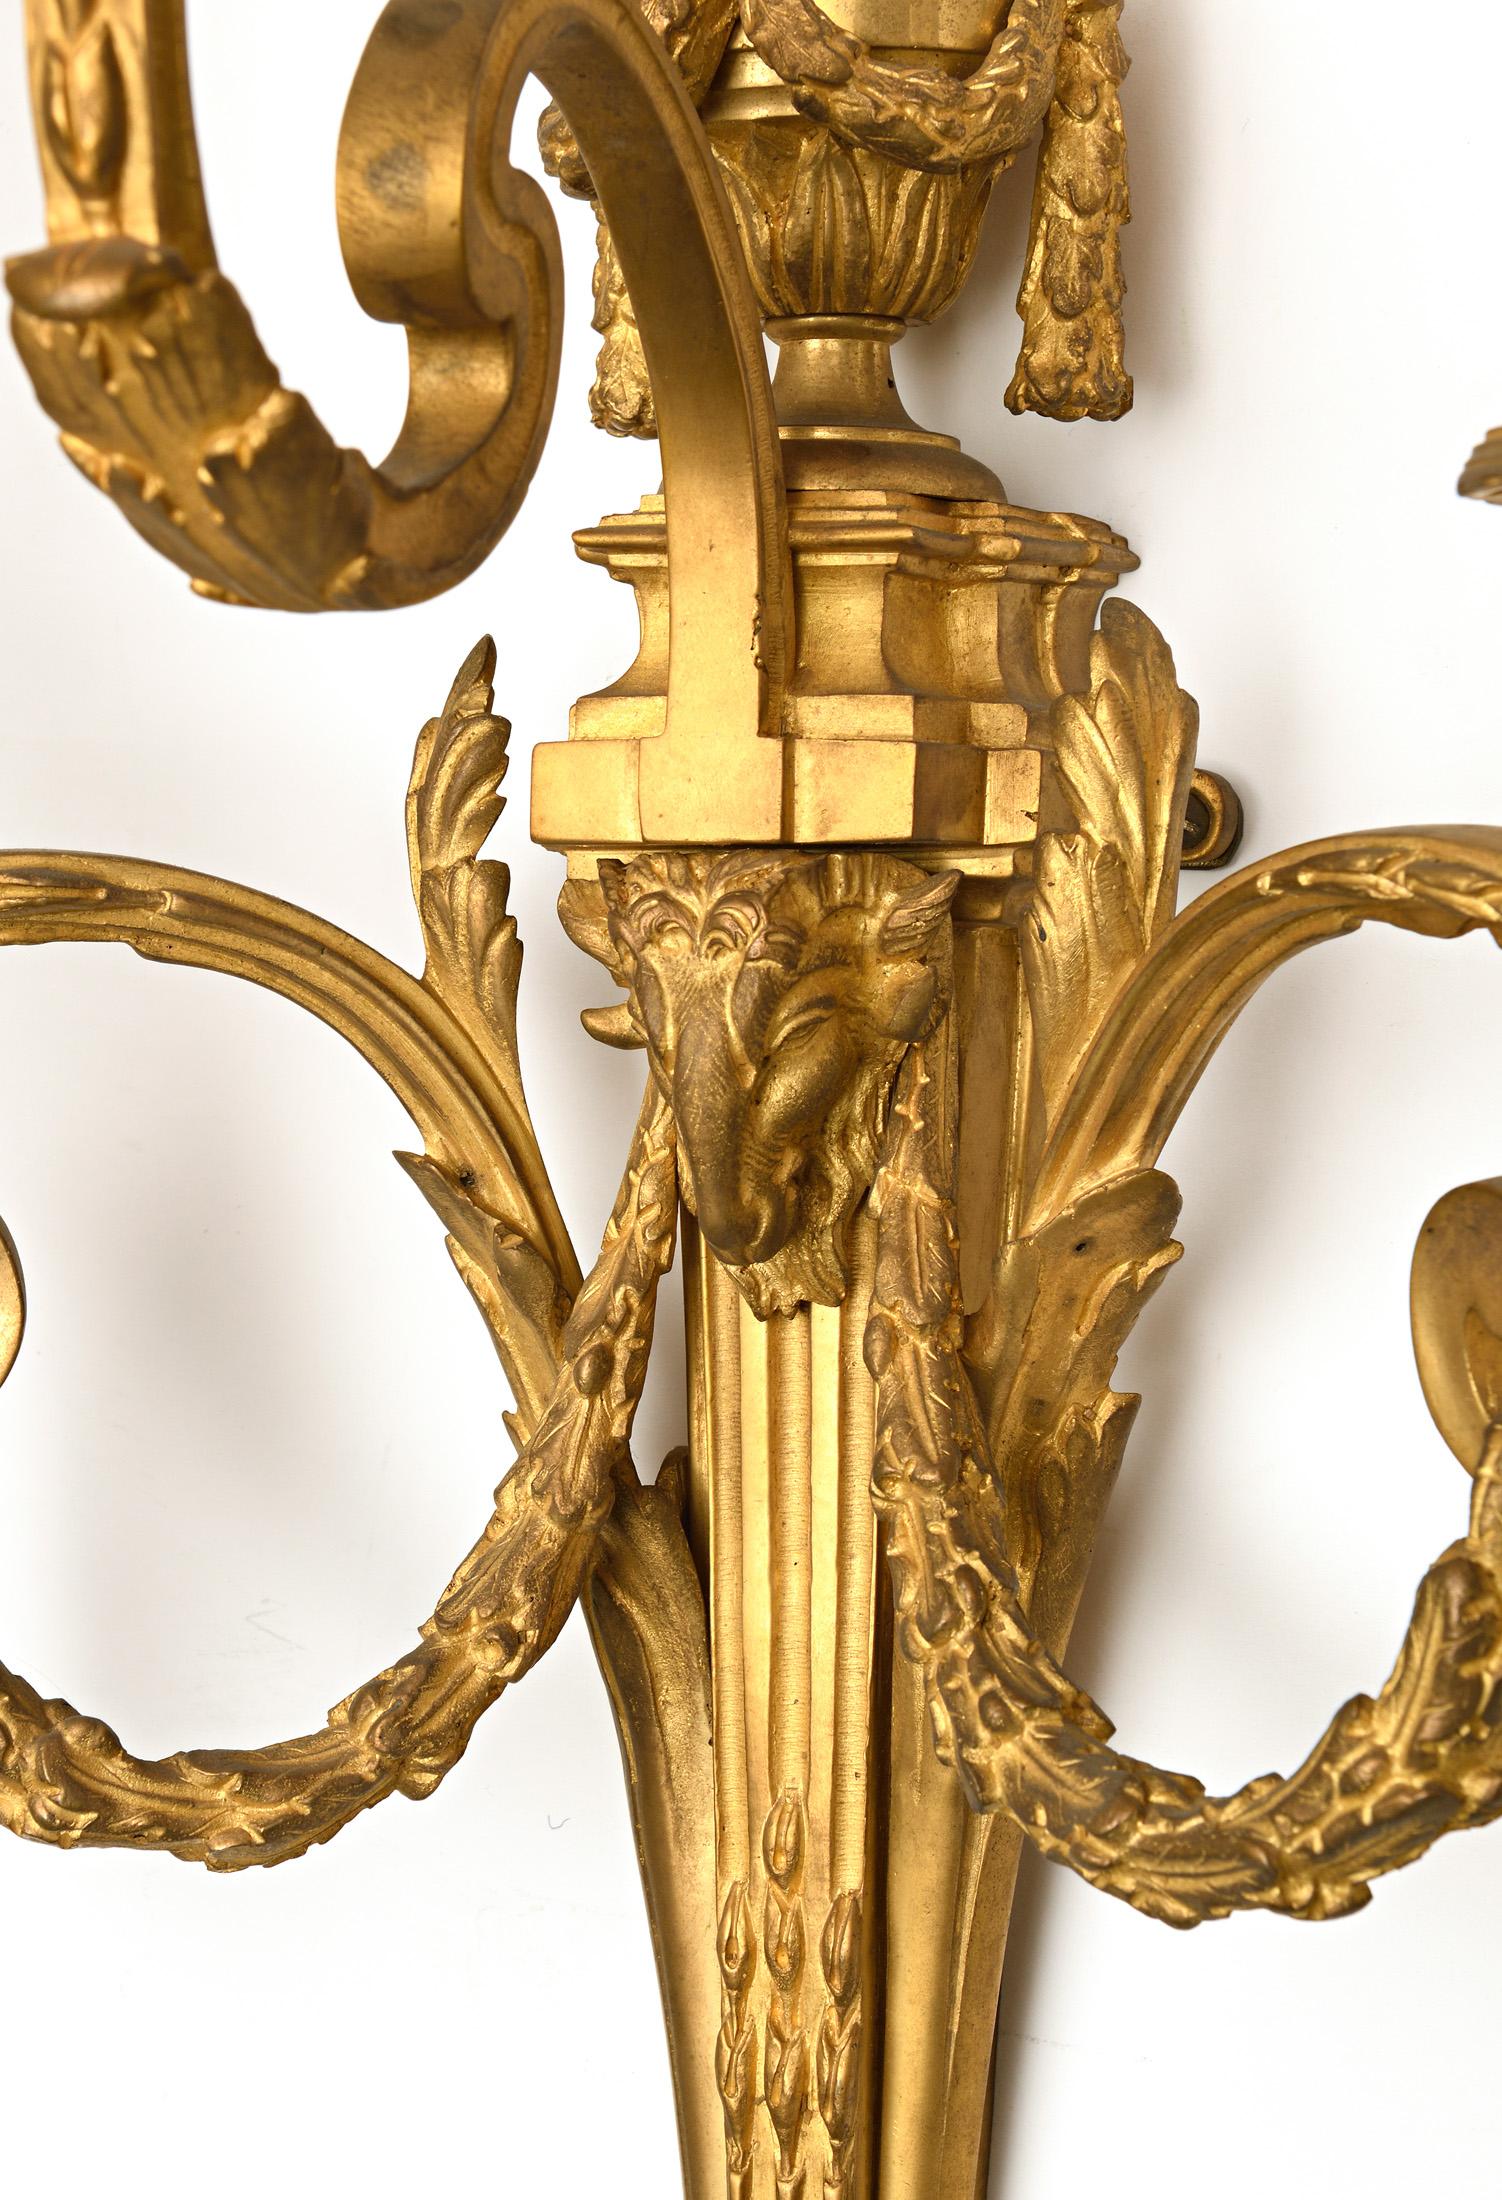 Exceptional match pair of sconces
Superb suite of four Louis XVI style scones in gilded bronze with heads rams and garland
These four sconces are exactly the same size and have a very slight difference in the light of the middle on one of the pairs.